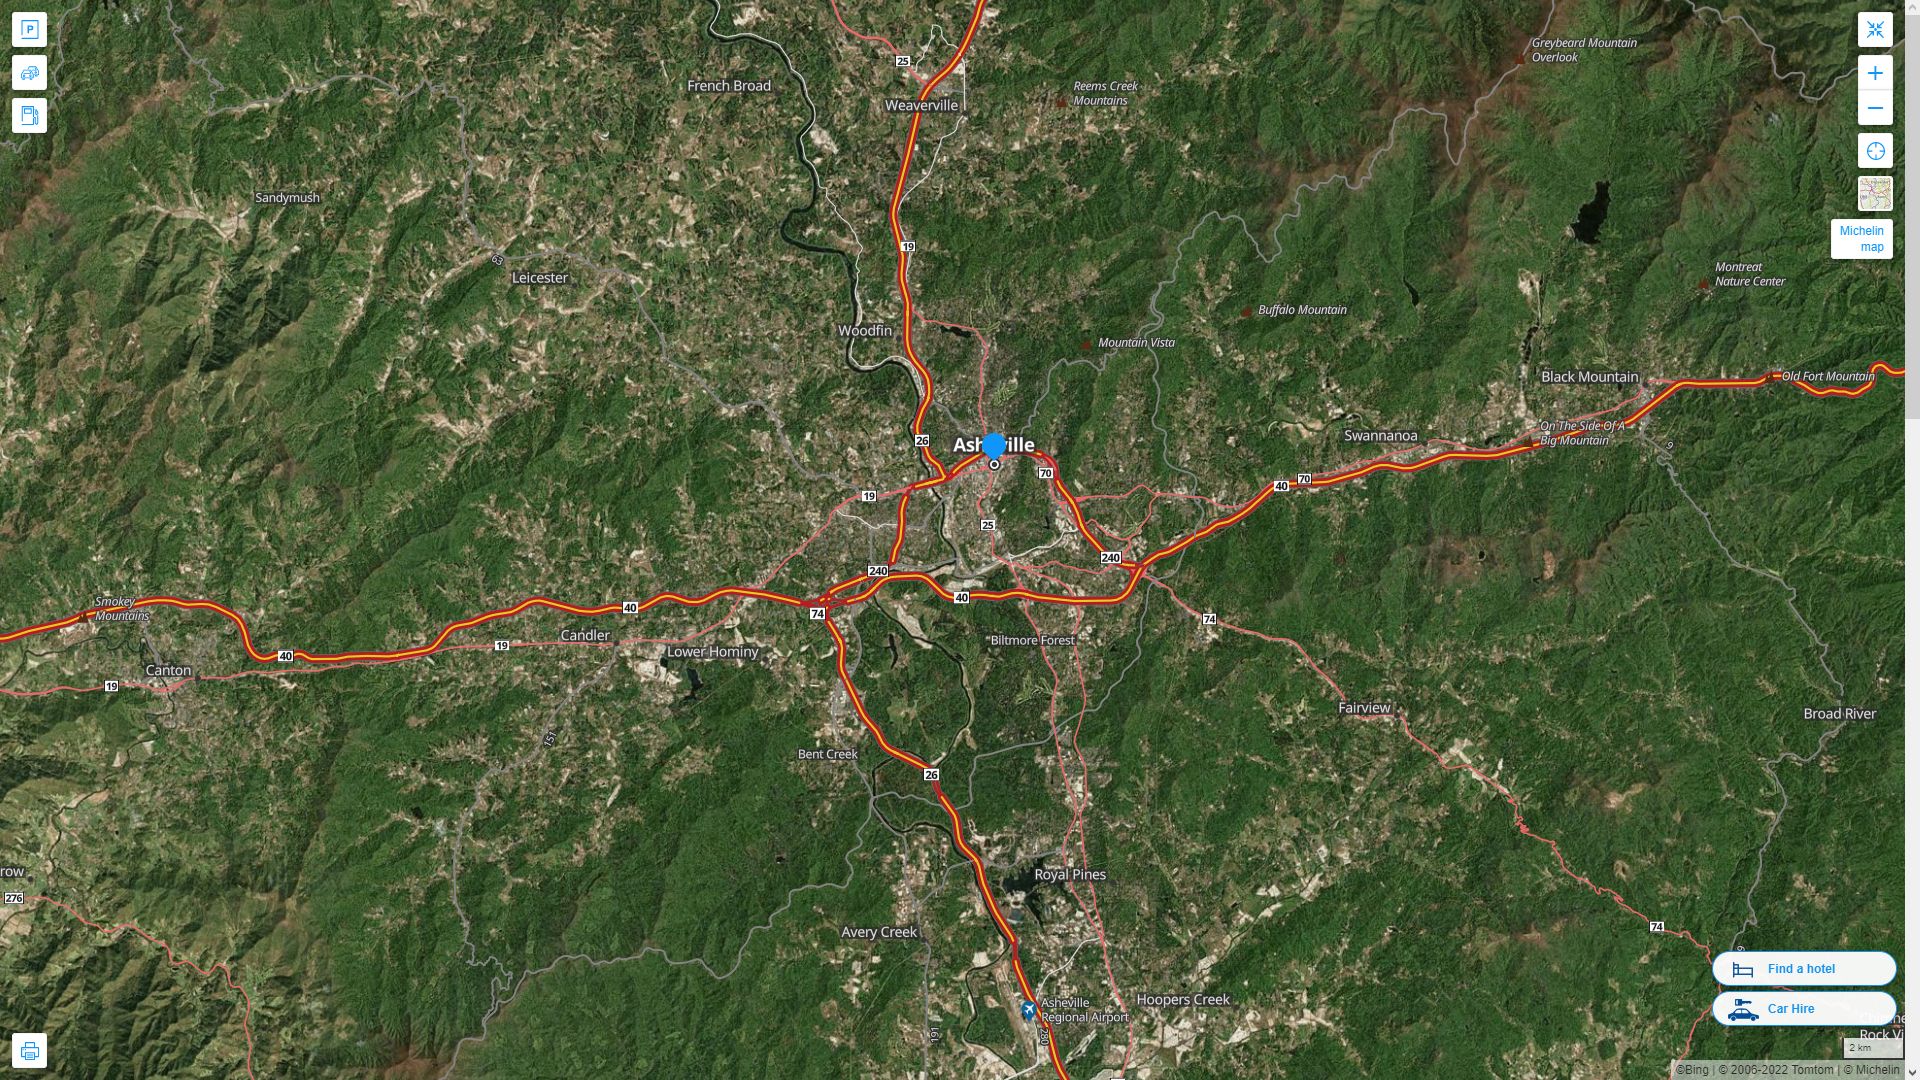 Asheville North Carolina Highway and Road Map with Satellite View